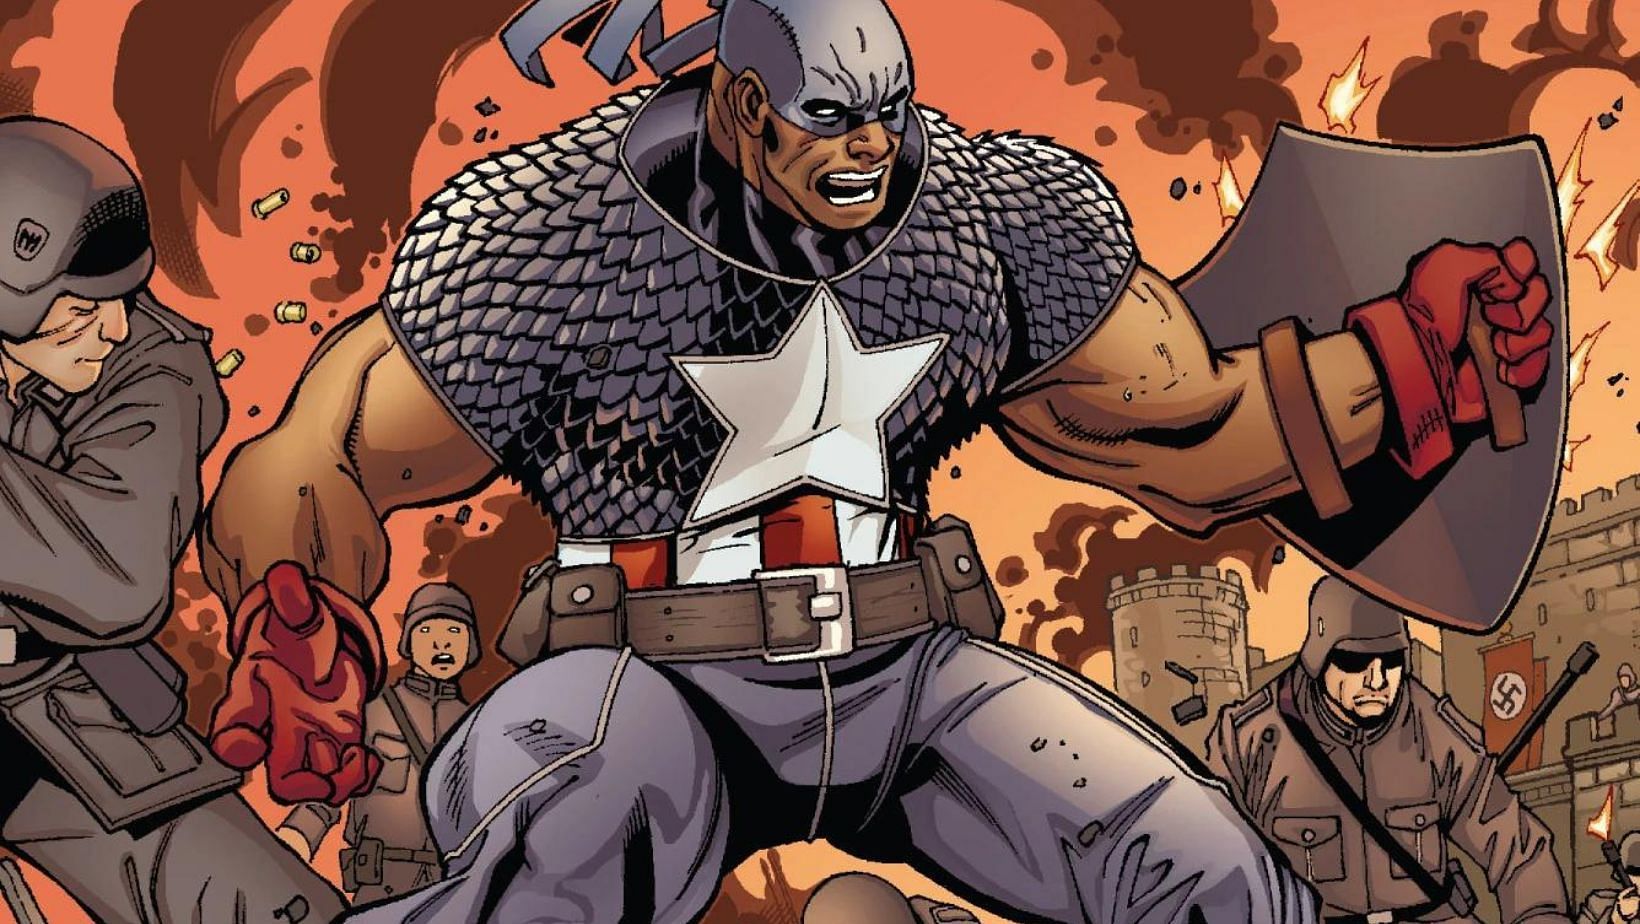 The Black Captain America who served as an inspiration to Steve Rogers (Image via Marvel Comics)